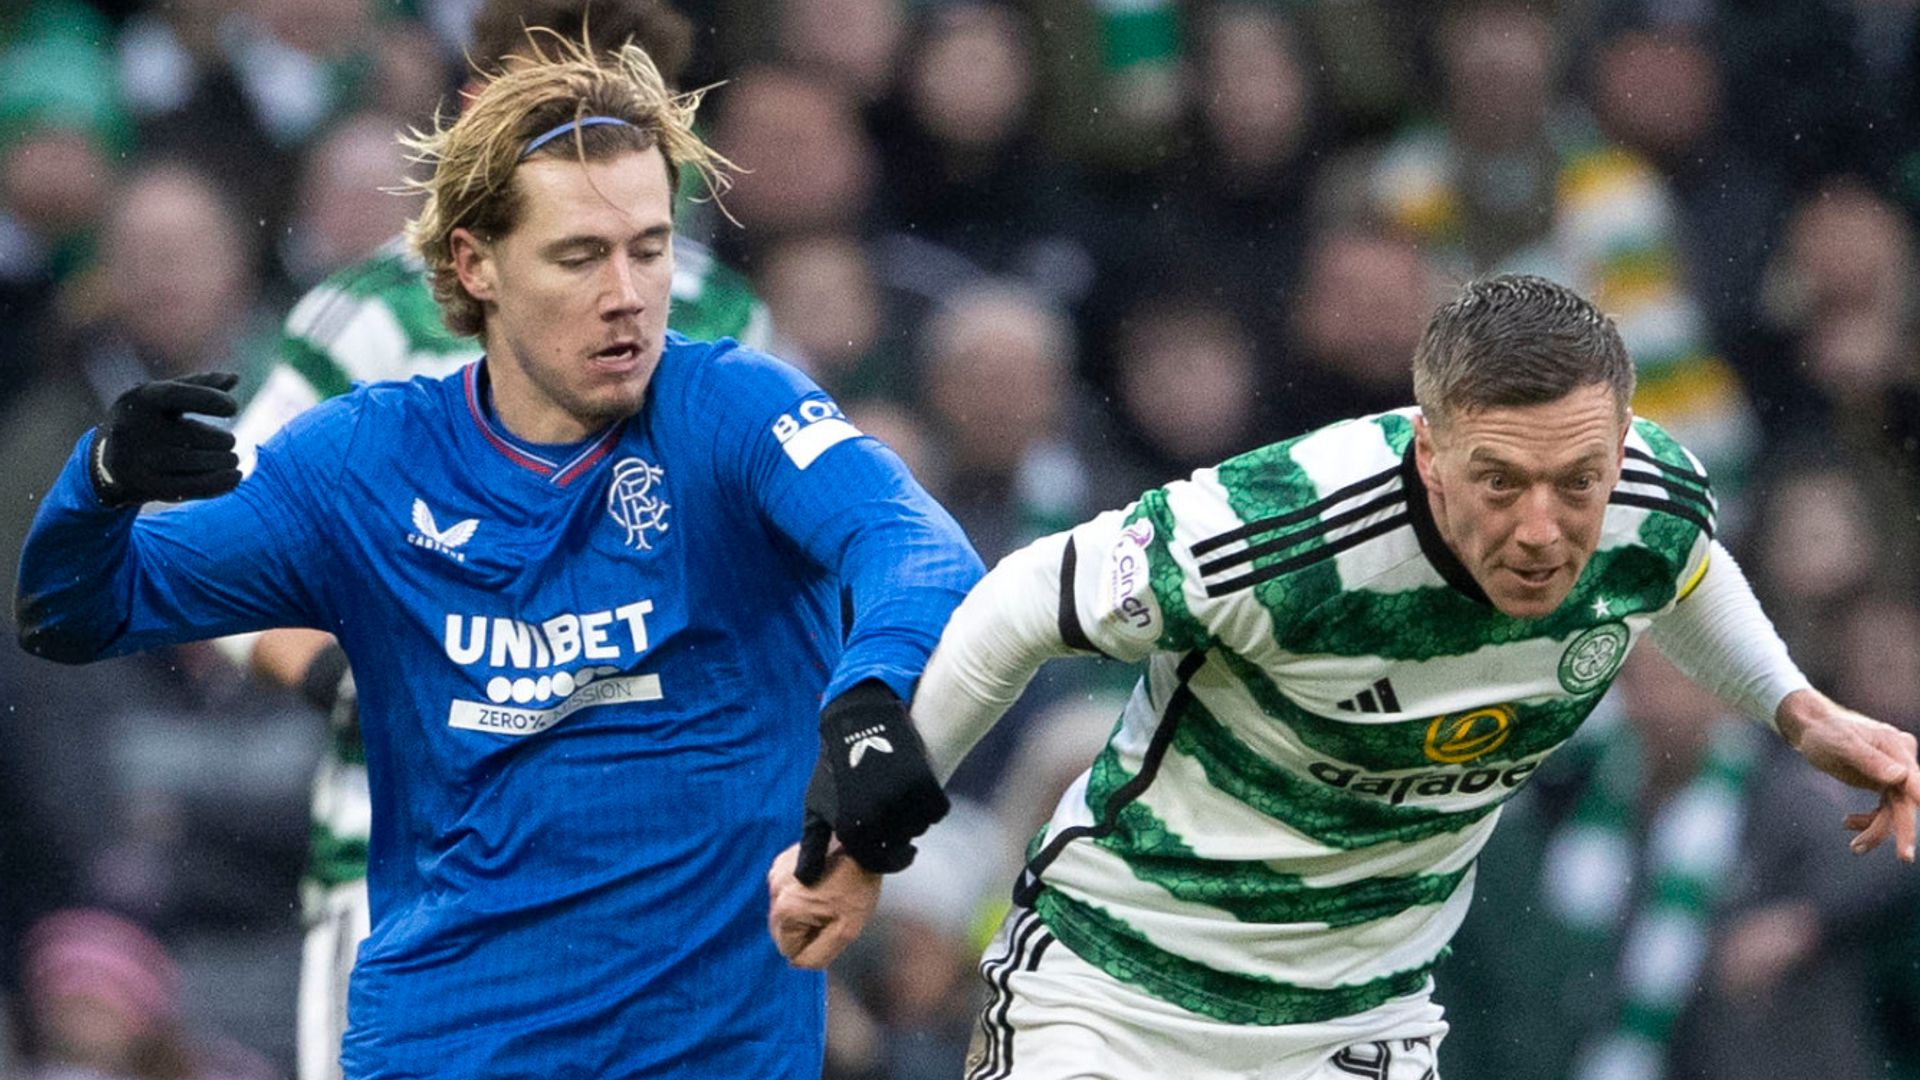 Is the Old Firm Rangers' last throw of the dice in title race?